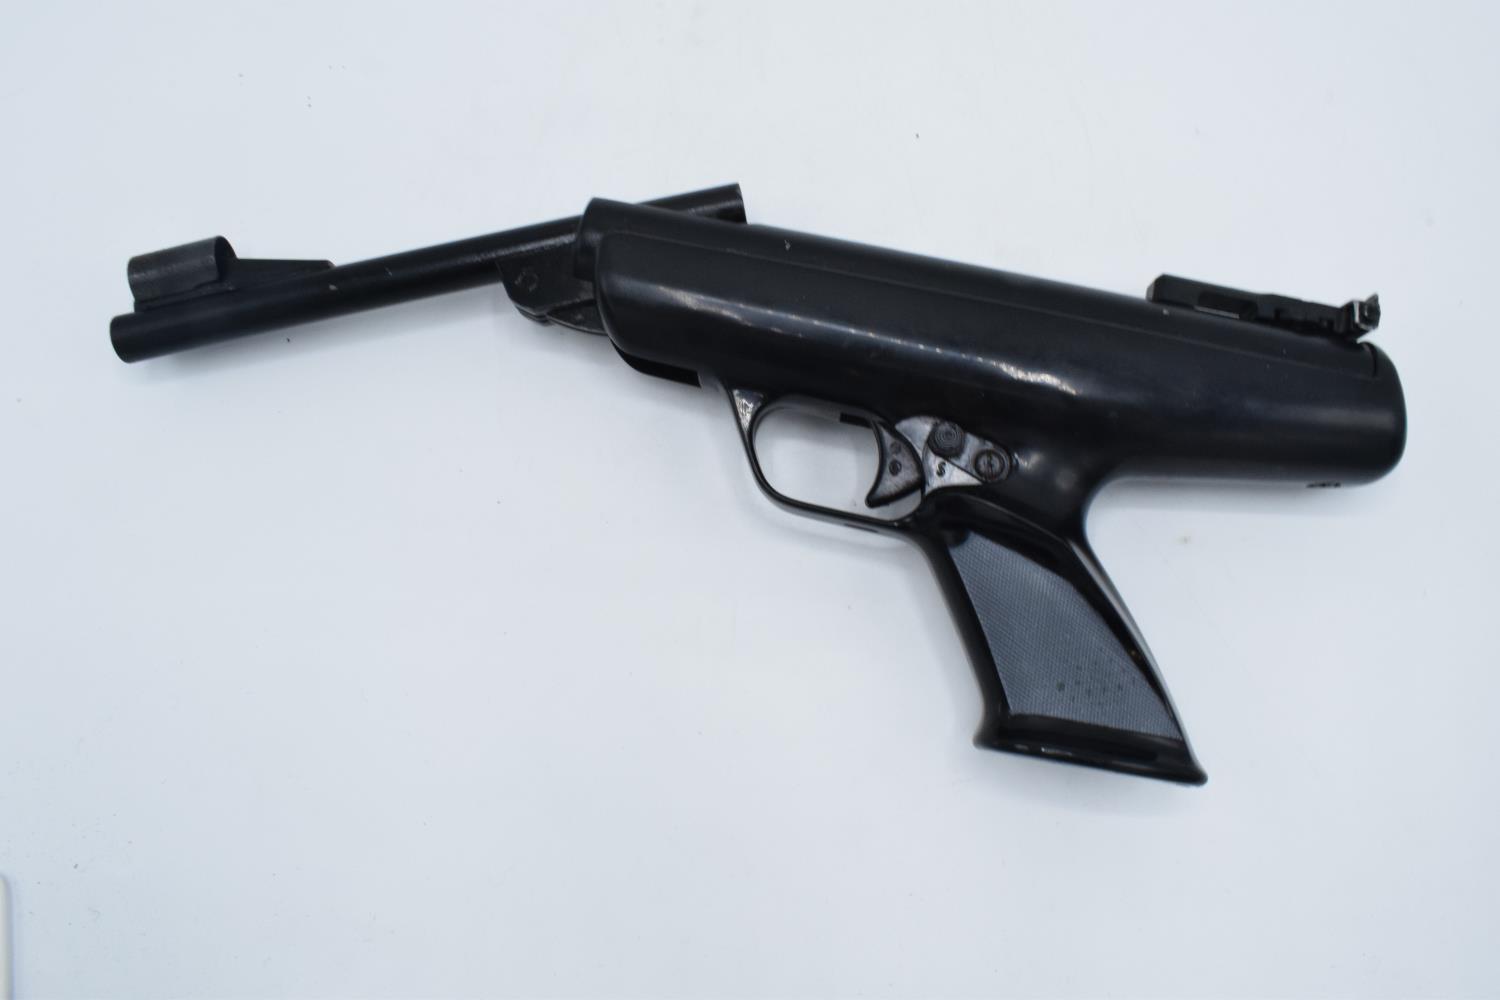 BSA Scorpion .22 cal air pistol. There is wear to the gun in the form of scratches, dents and knocks - Image 10 of 13